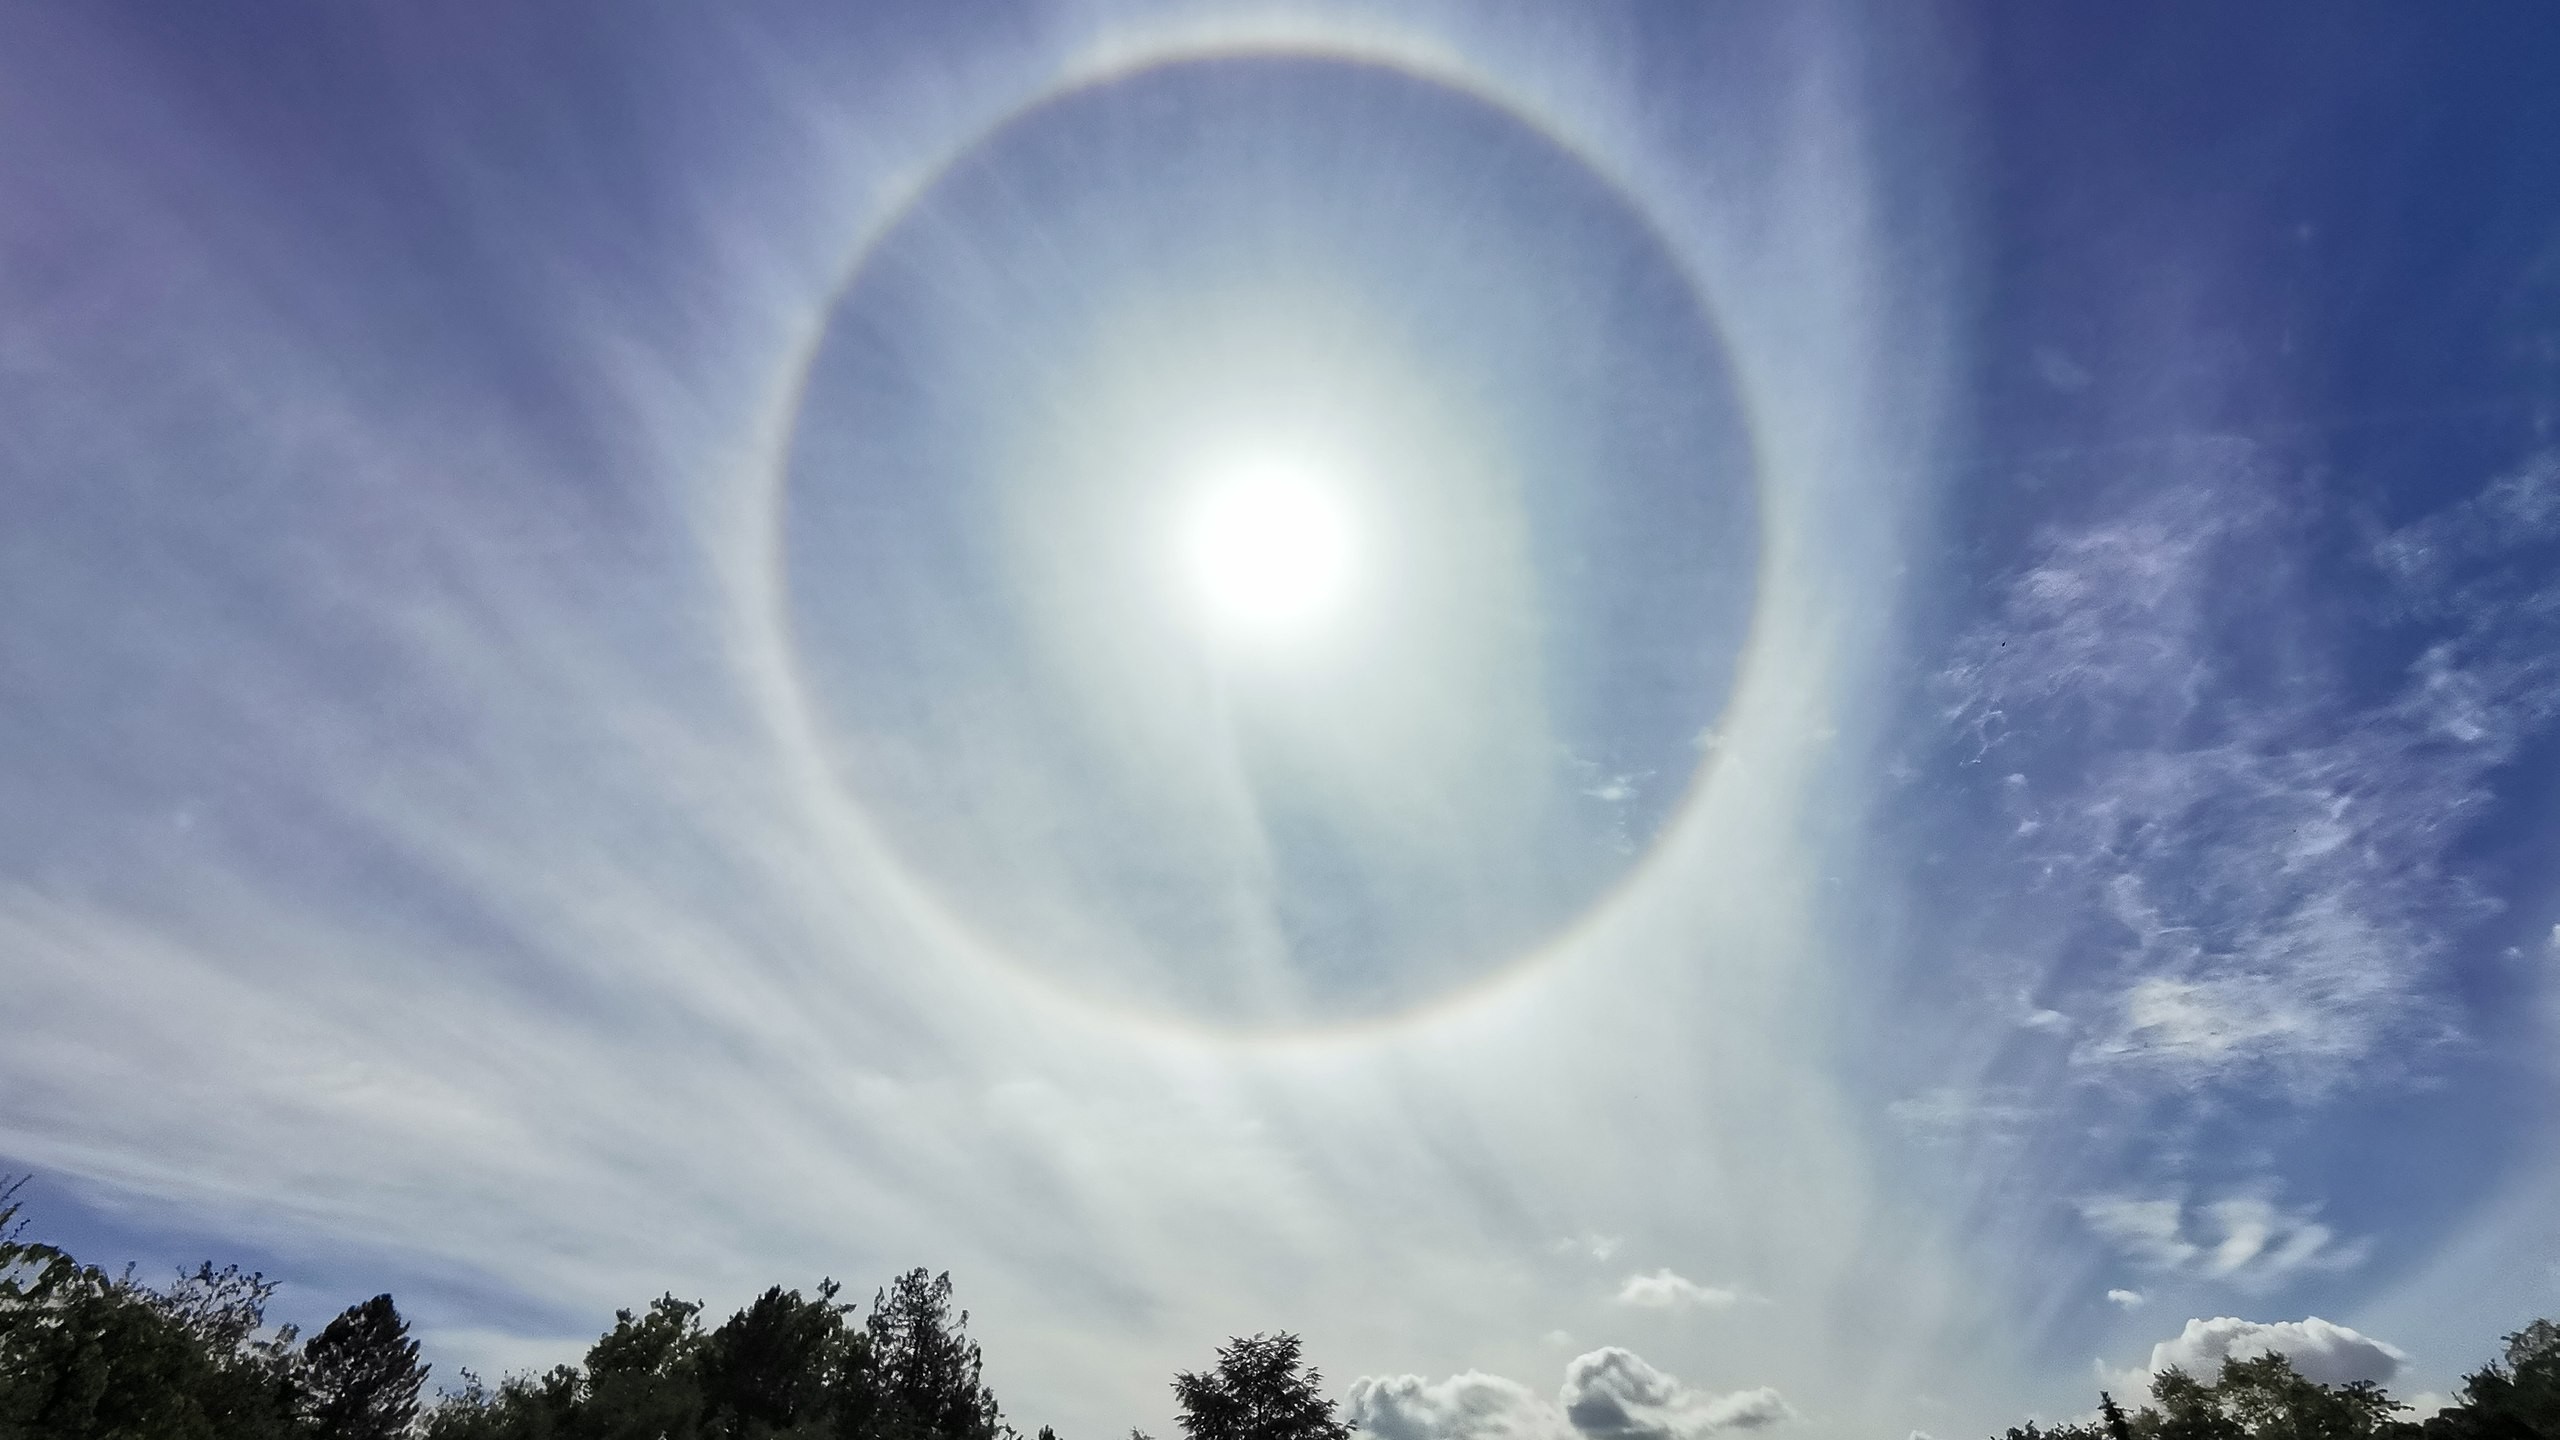 What is Sun's halo? - INSIGHTSIAS